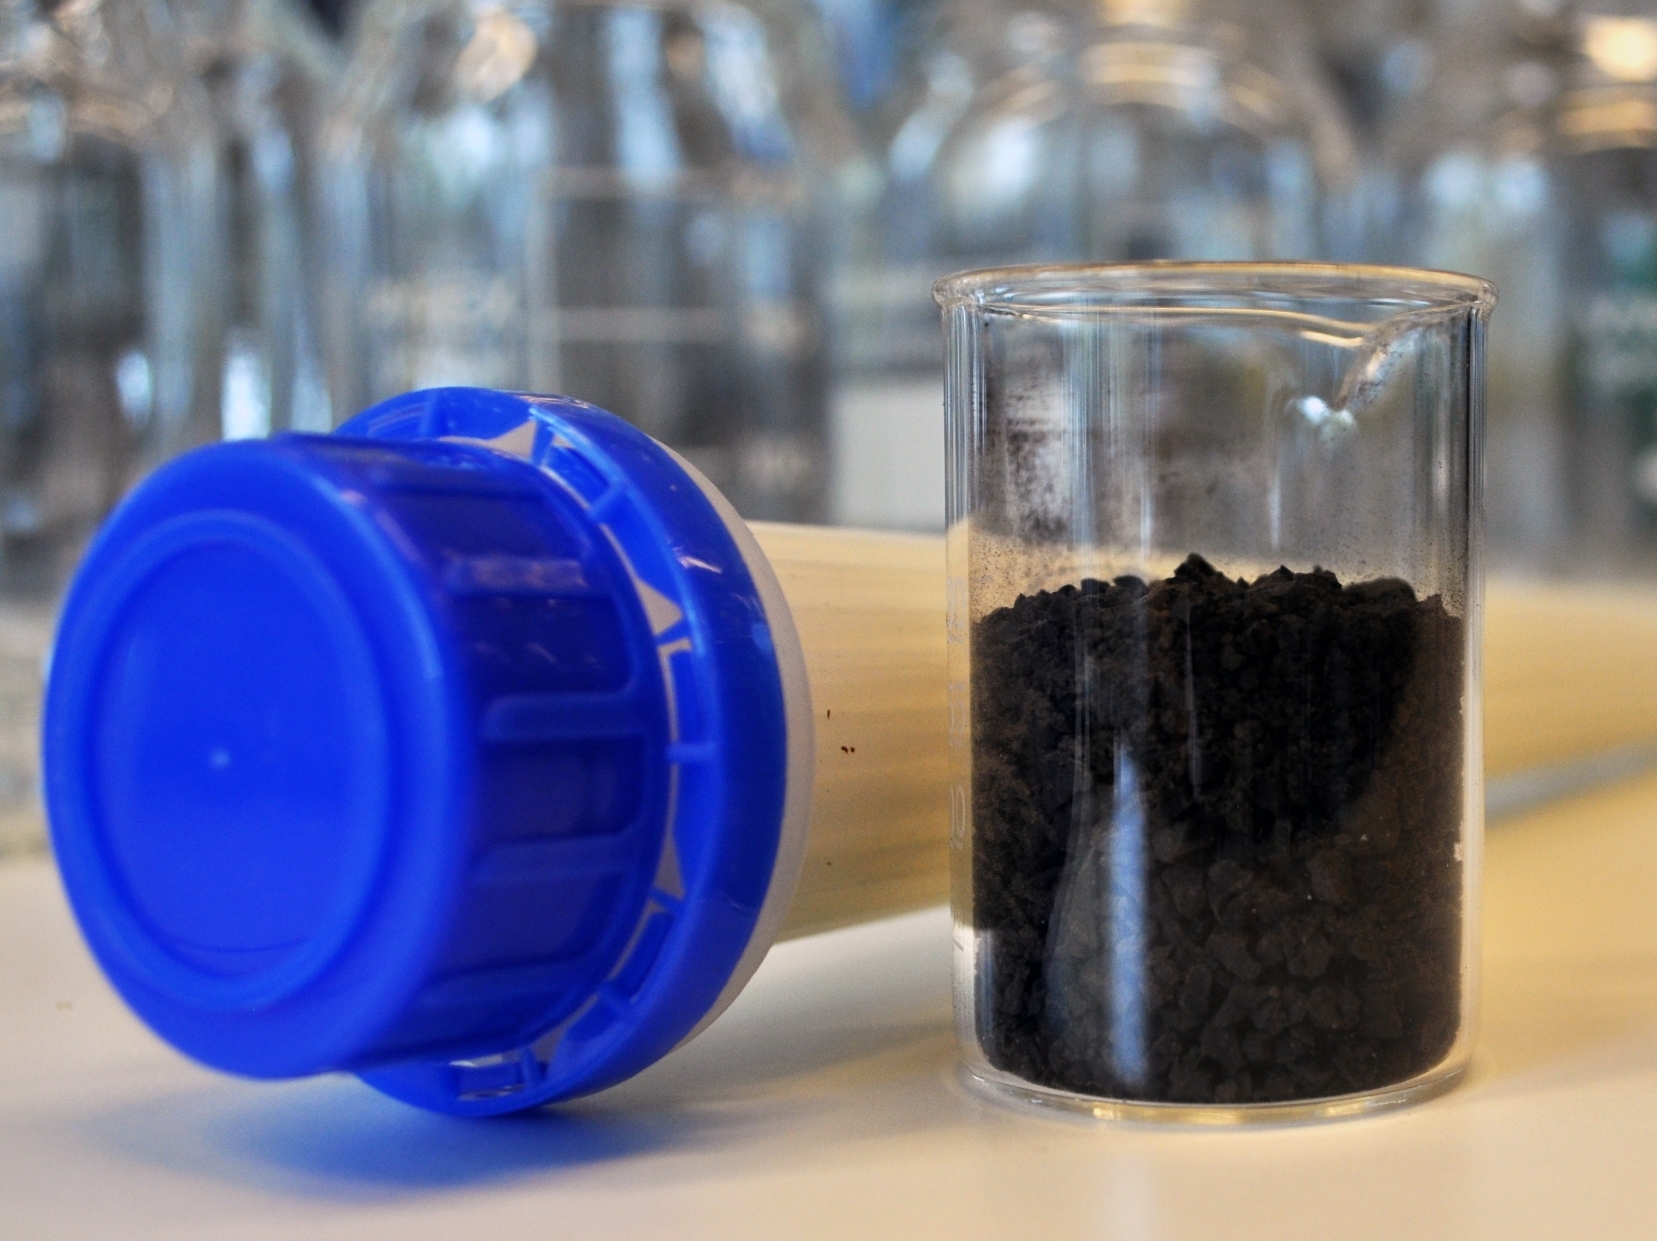 Biocarbon photographed in a research laboratory at Umeå University, Sweden. Photo by Eva Weidemann.